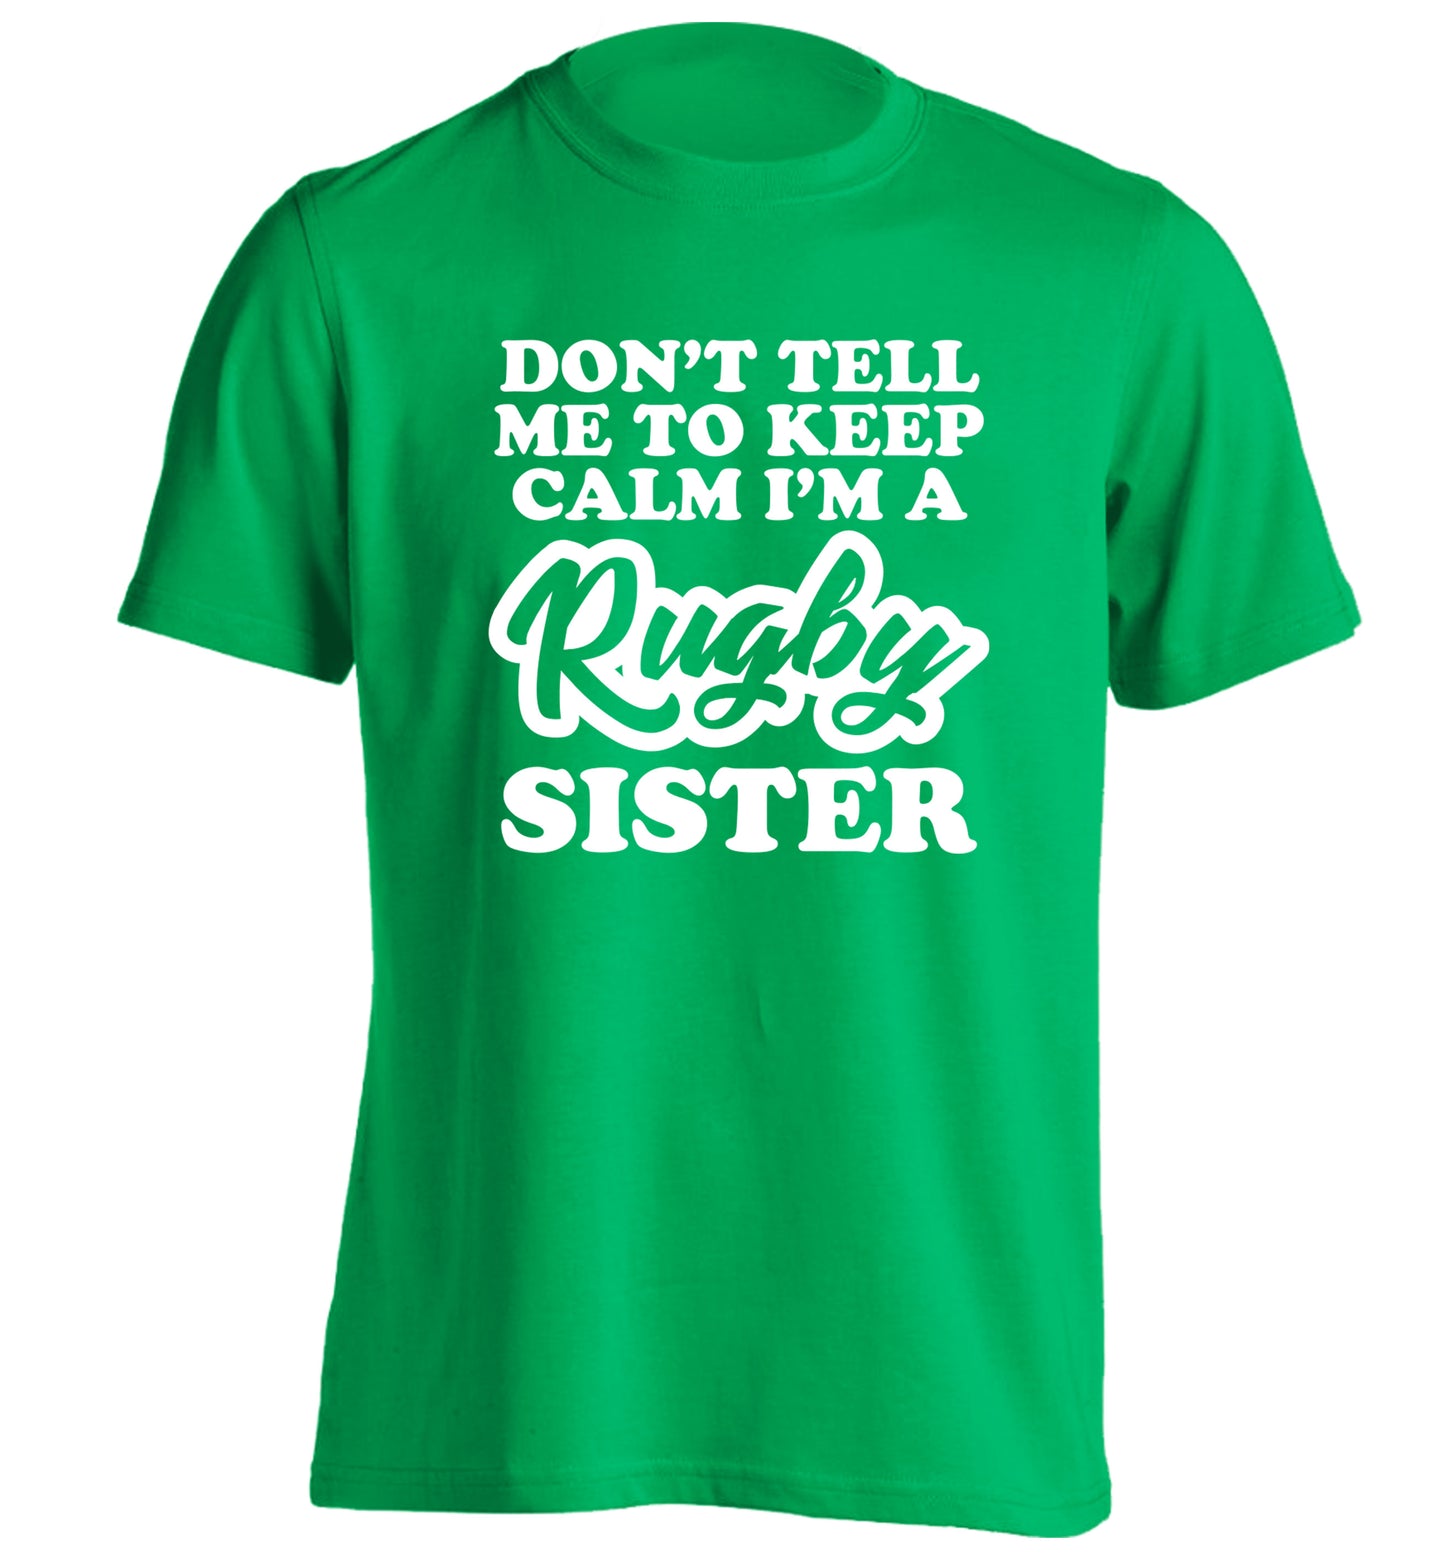 Don't tell me keep calm I'm a rugby sister adults unisex green Tshirt 2XL